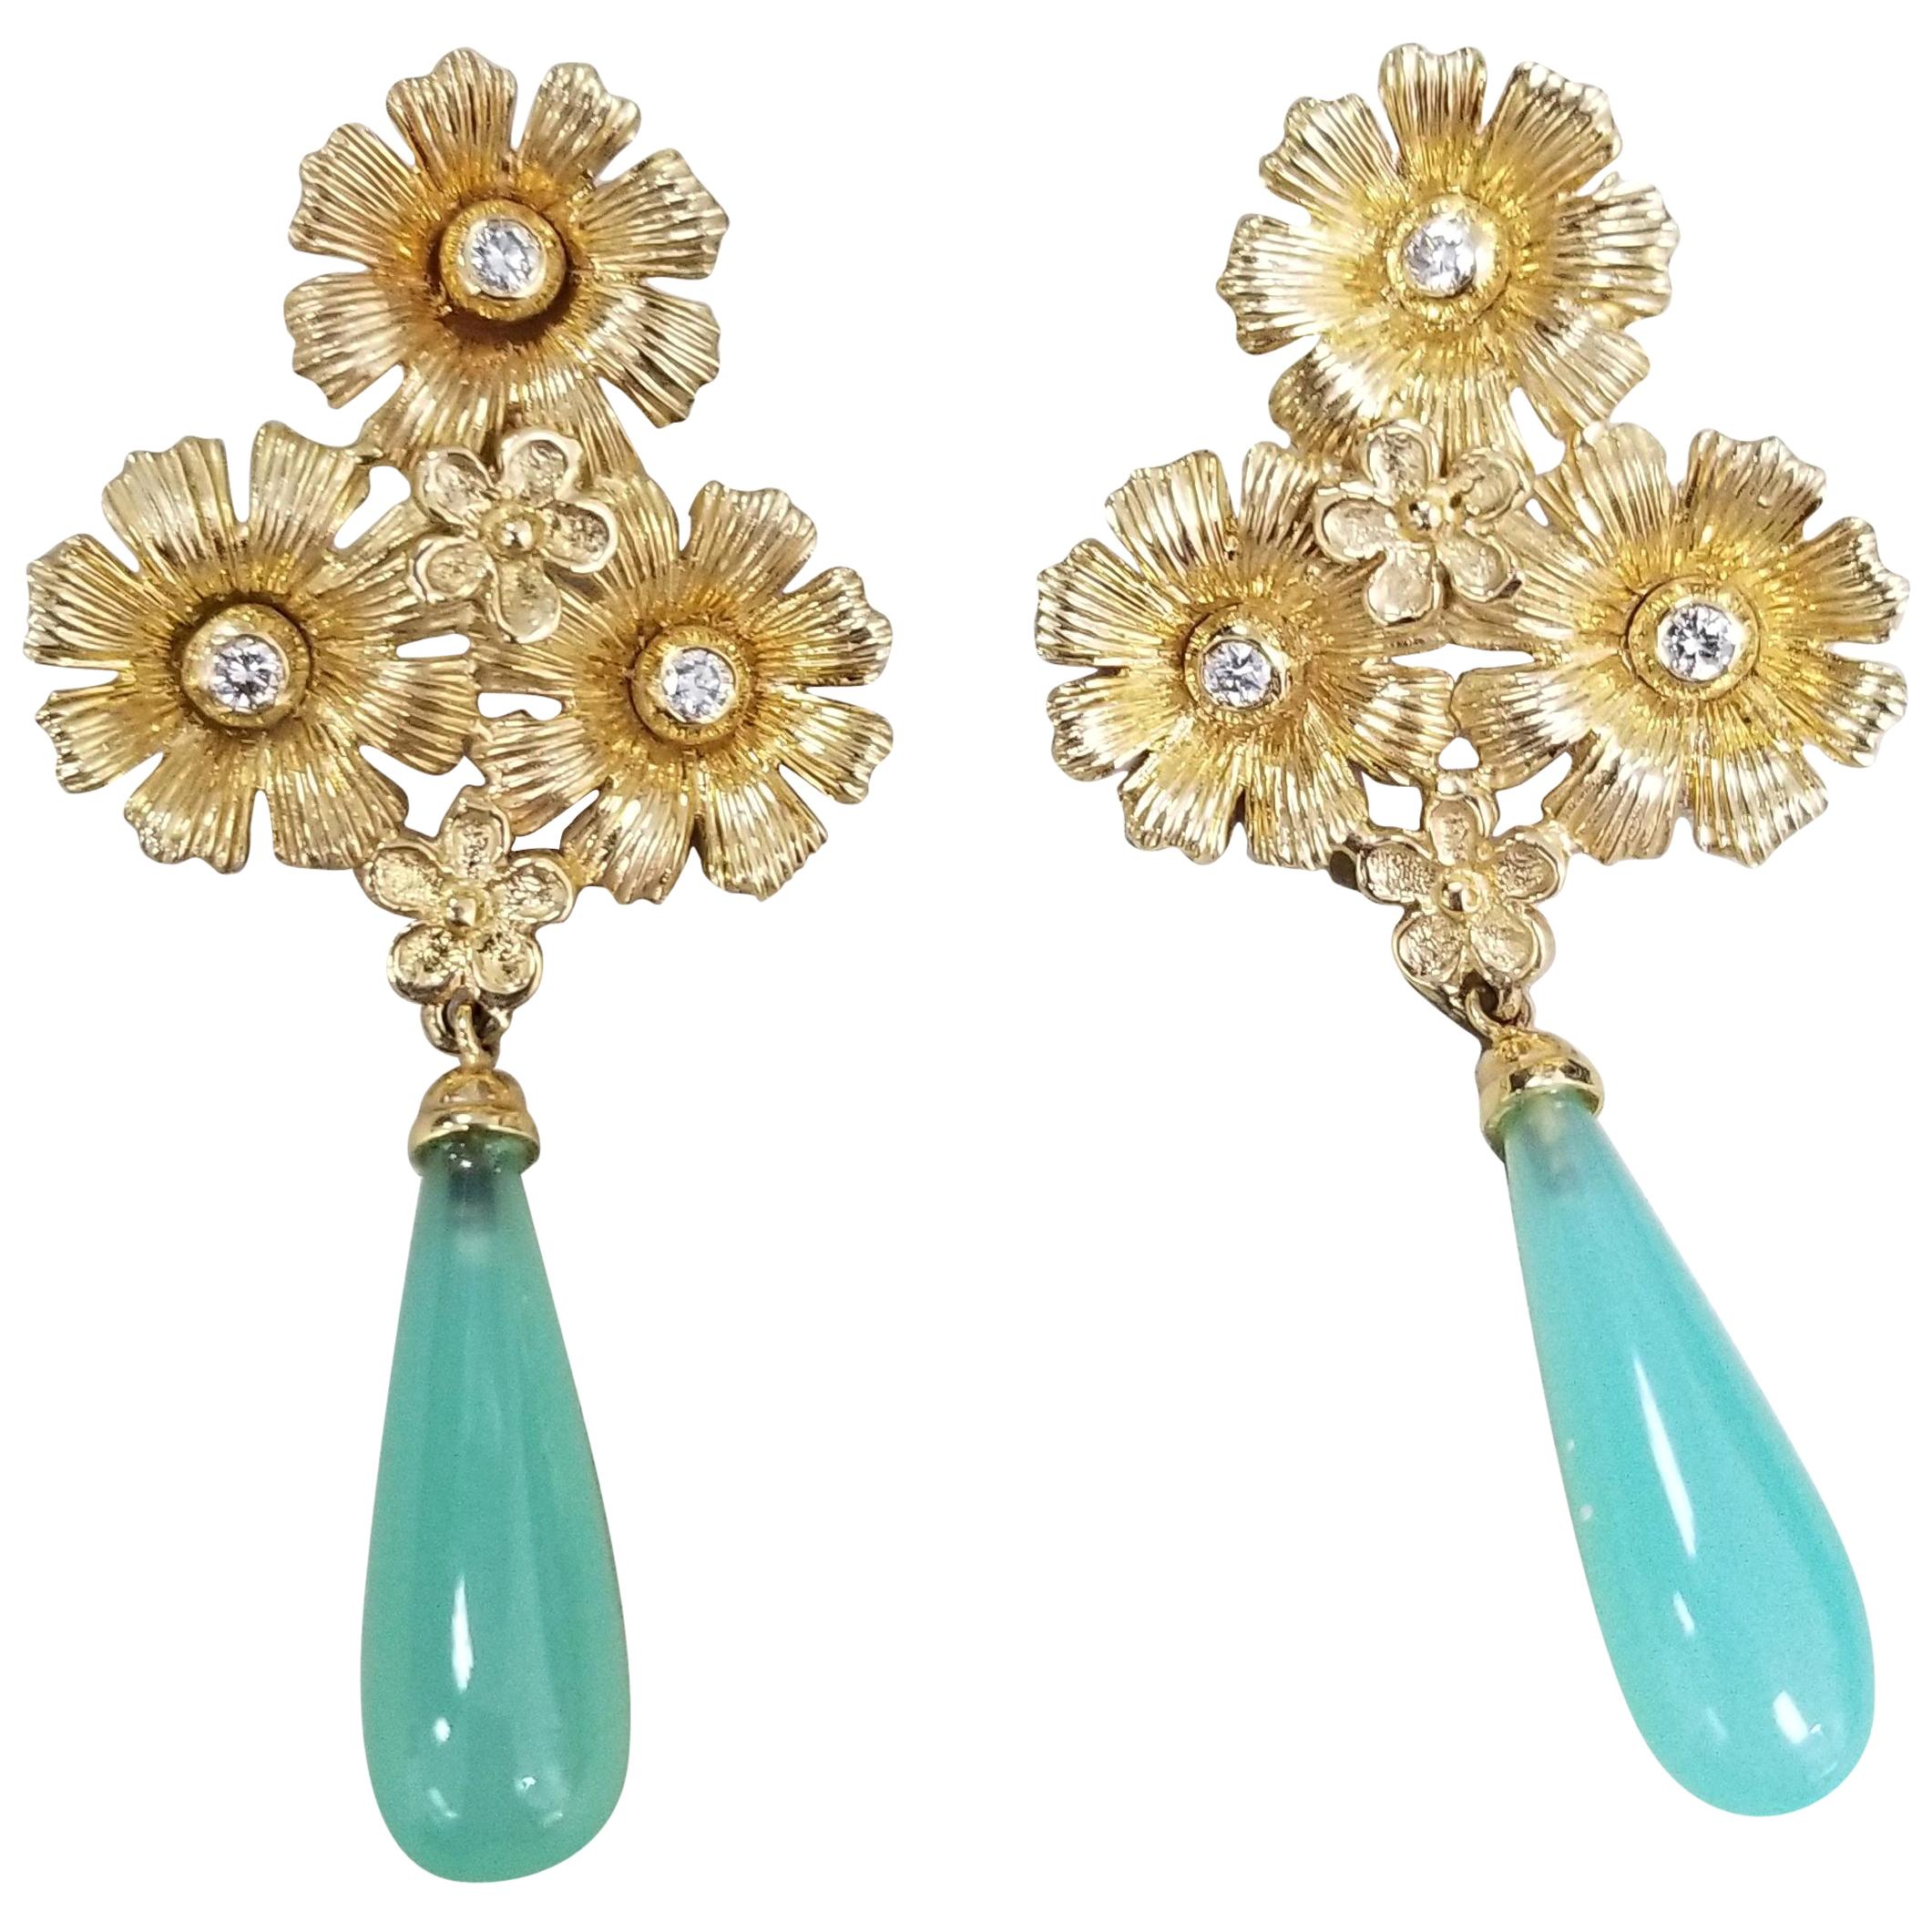 14 Karat Yellow Gold Flower Earrings with Diamonds and Chalcedony Drops